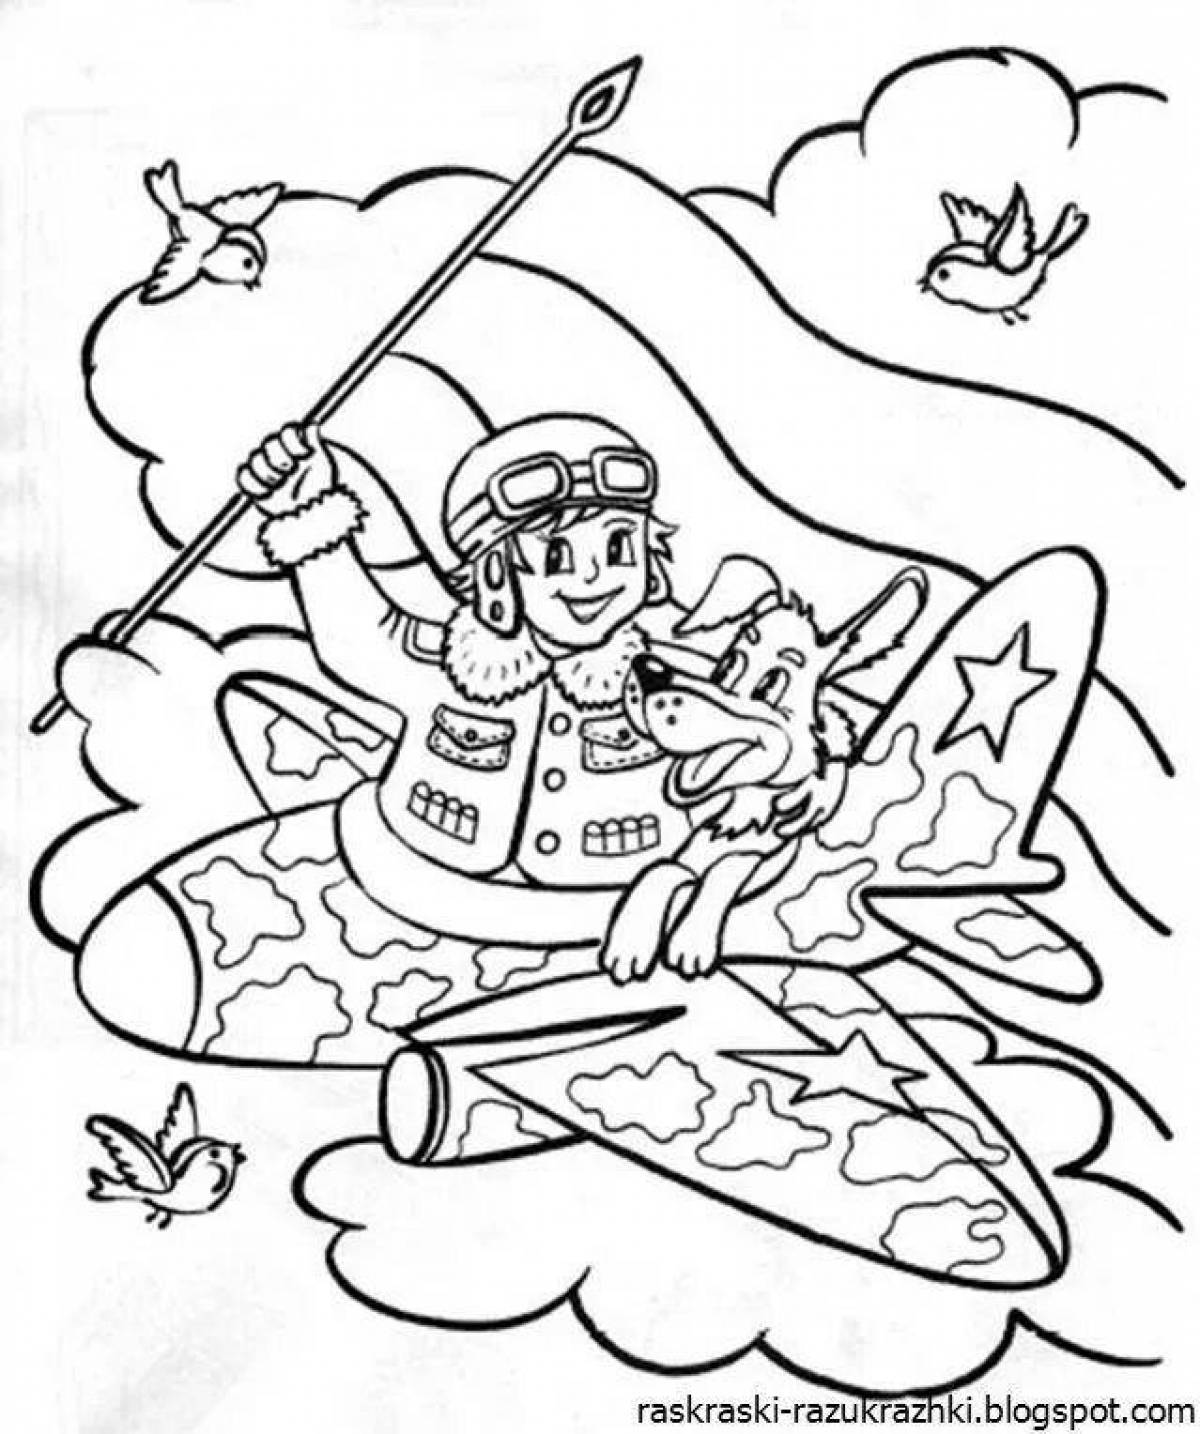 Coloring page energetic February 23